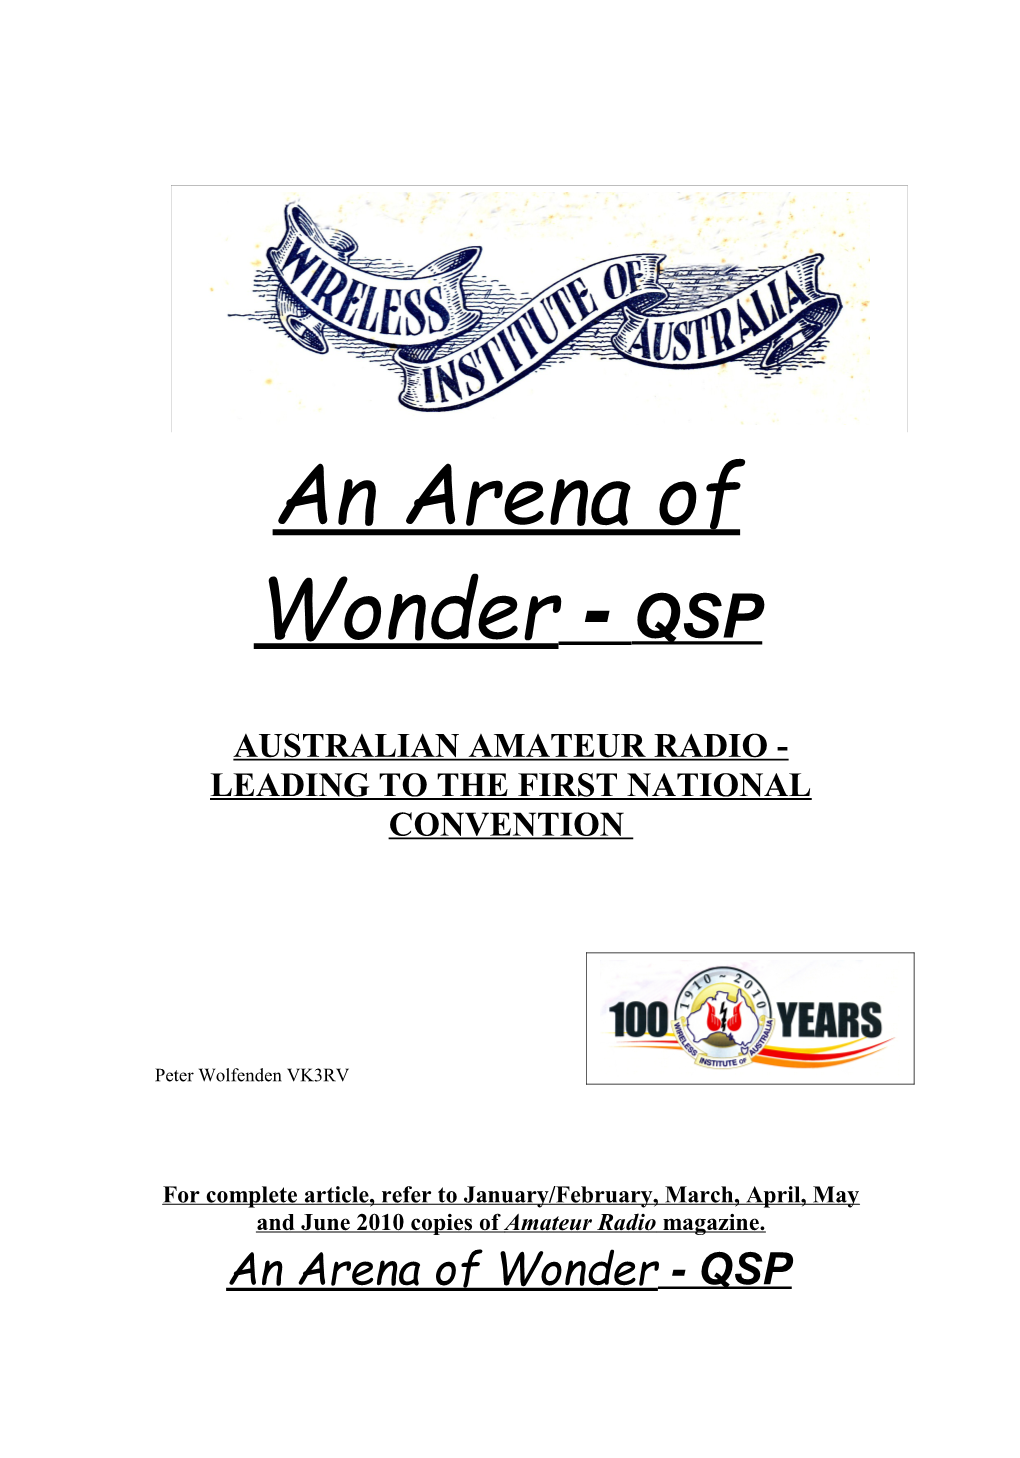 Australian Amateur Radio - Leading to the First National Convention